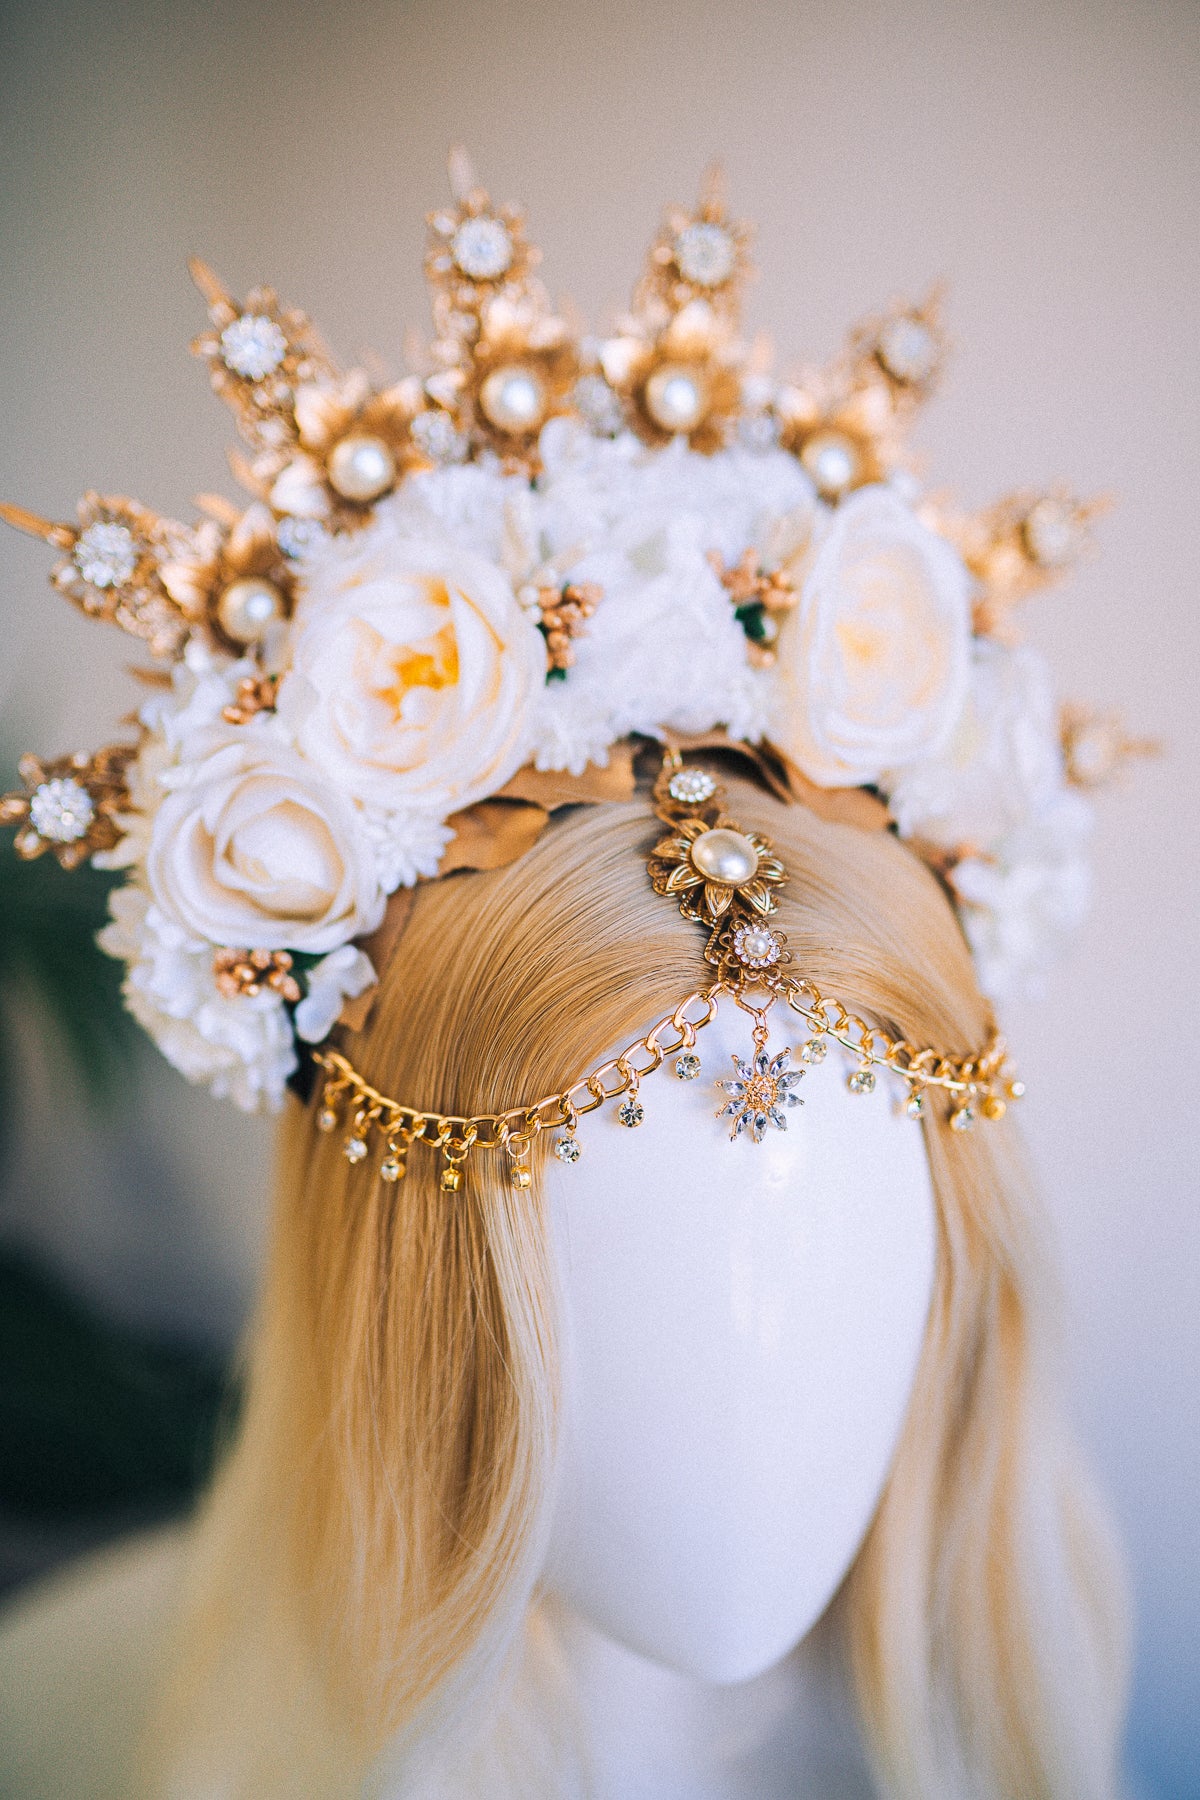 Load image into Gallery viewer, White Flower Tiara
